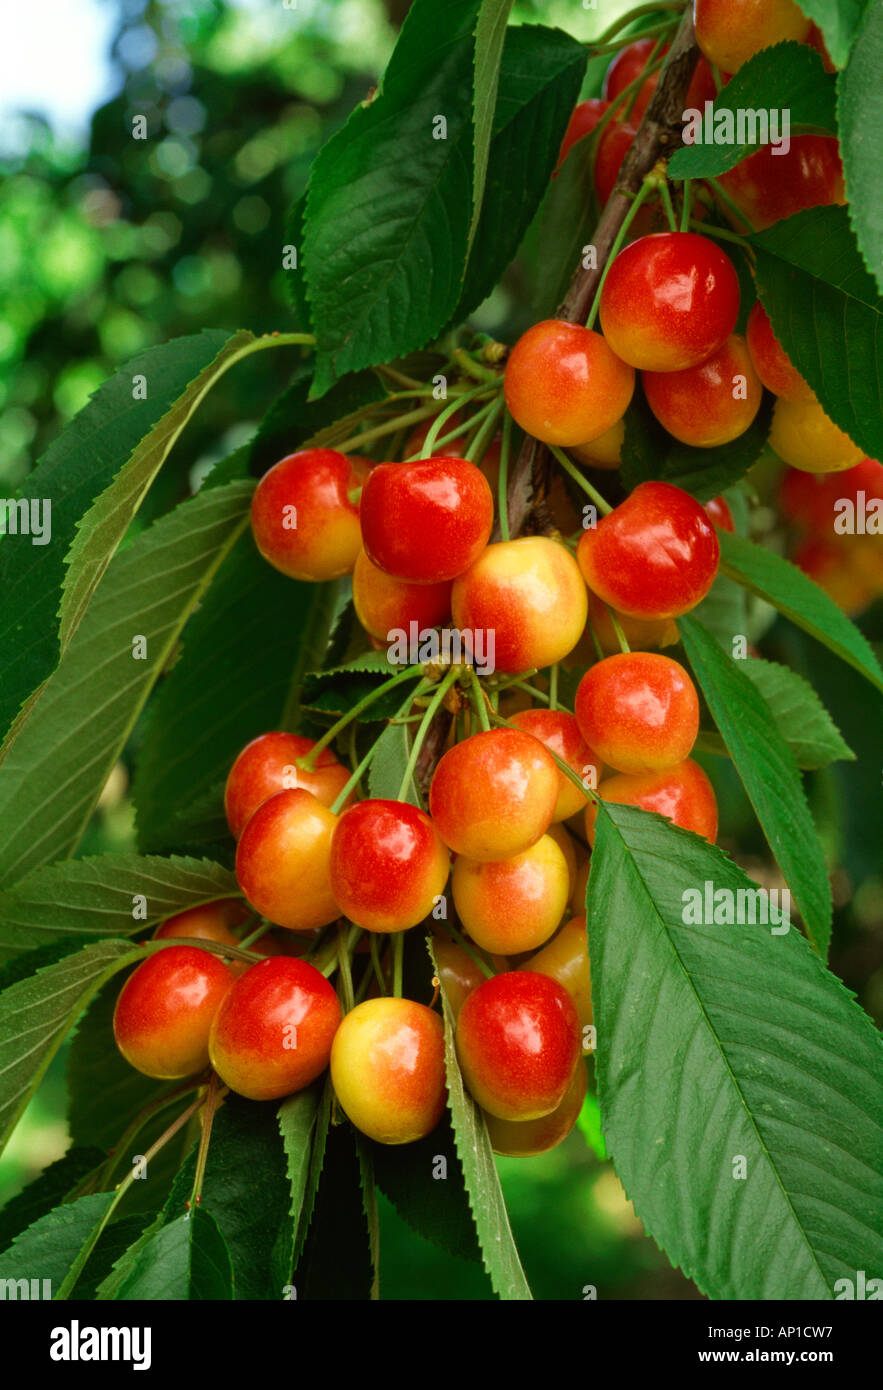 Agriculture - A cluster of ripe Rainier cherries on the tree, ready for harvest / Yakima Valley, Washington, USA. Stock Photo